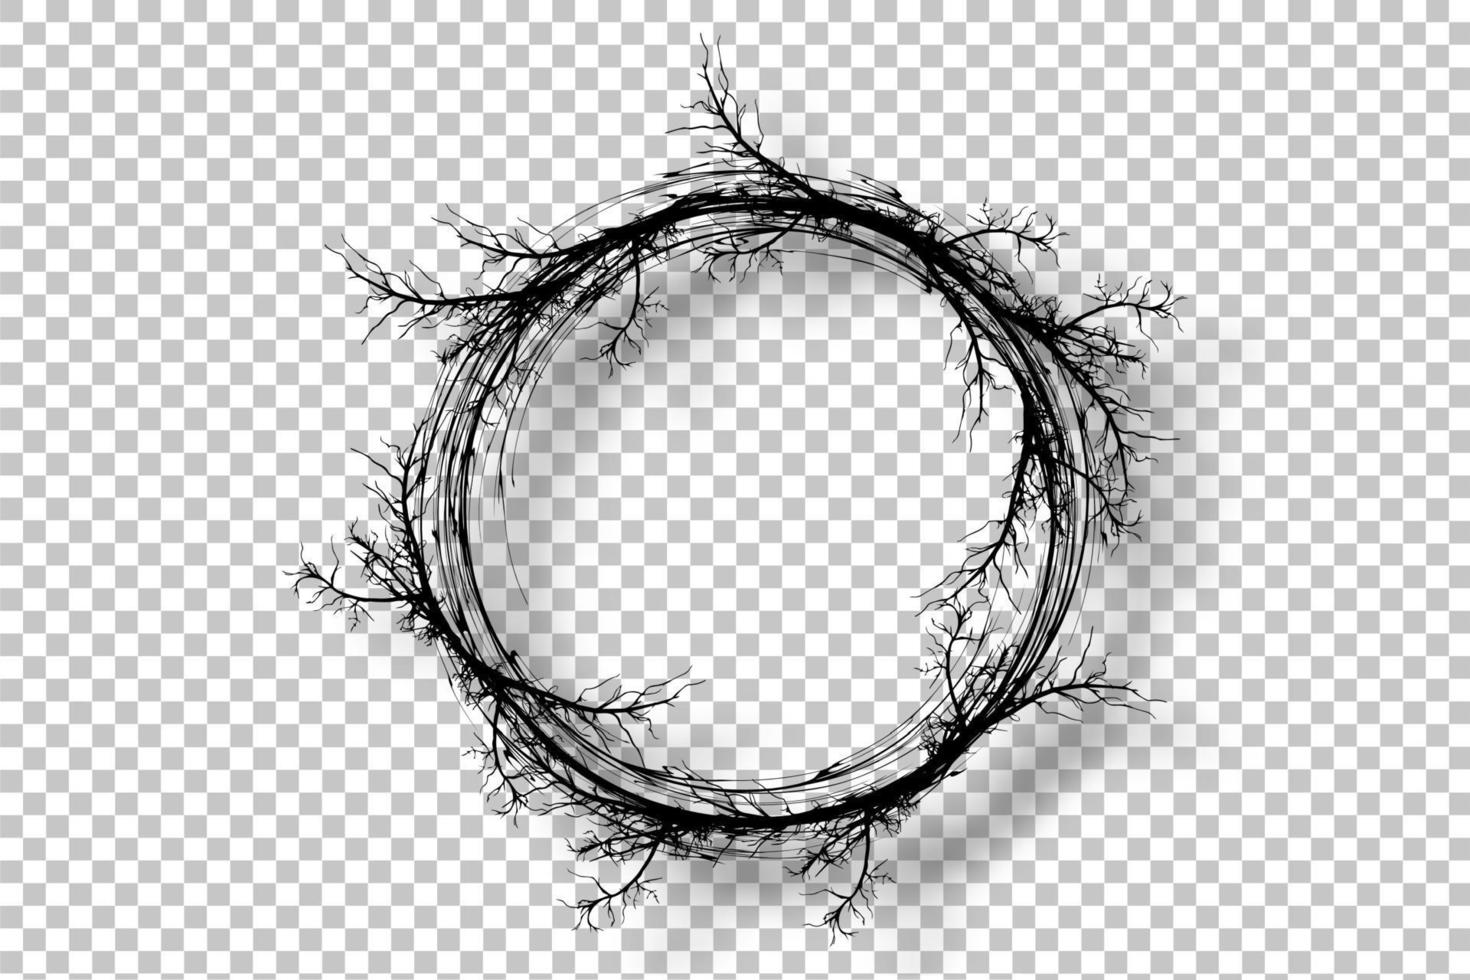 wreath of branches, a realistic round frame border of twisted branches, vector illustration isolated on transparent background